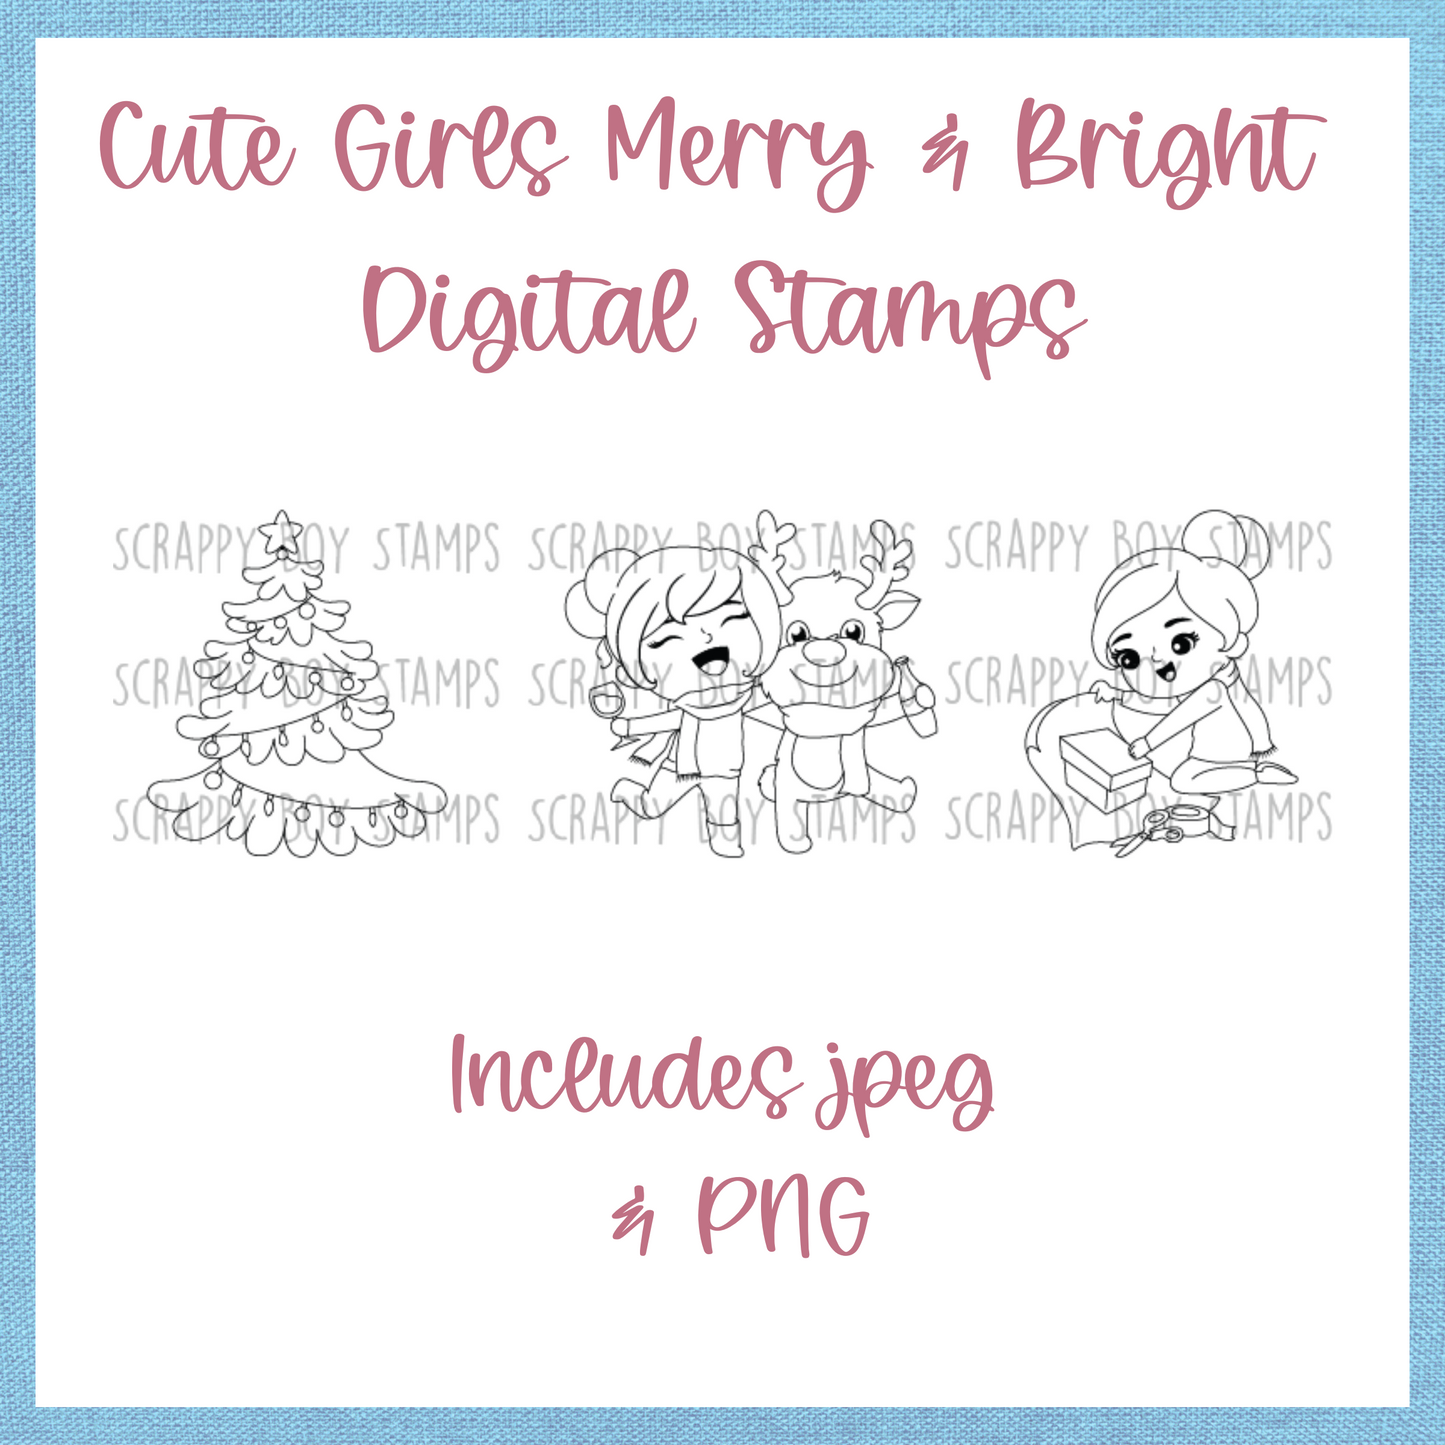 Cute Girls Merry & Bright - DIGITAL STAMP scrappyboystamps